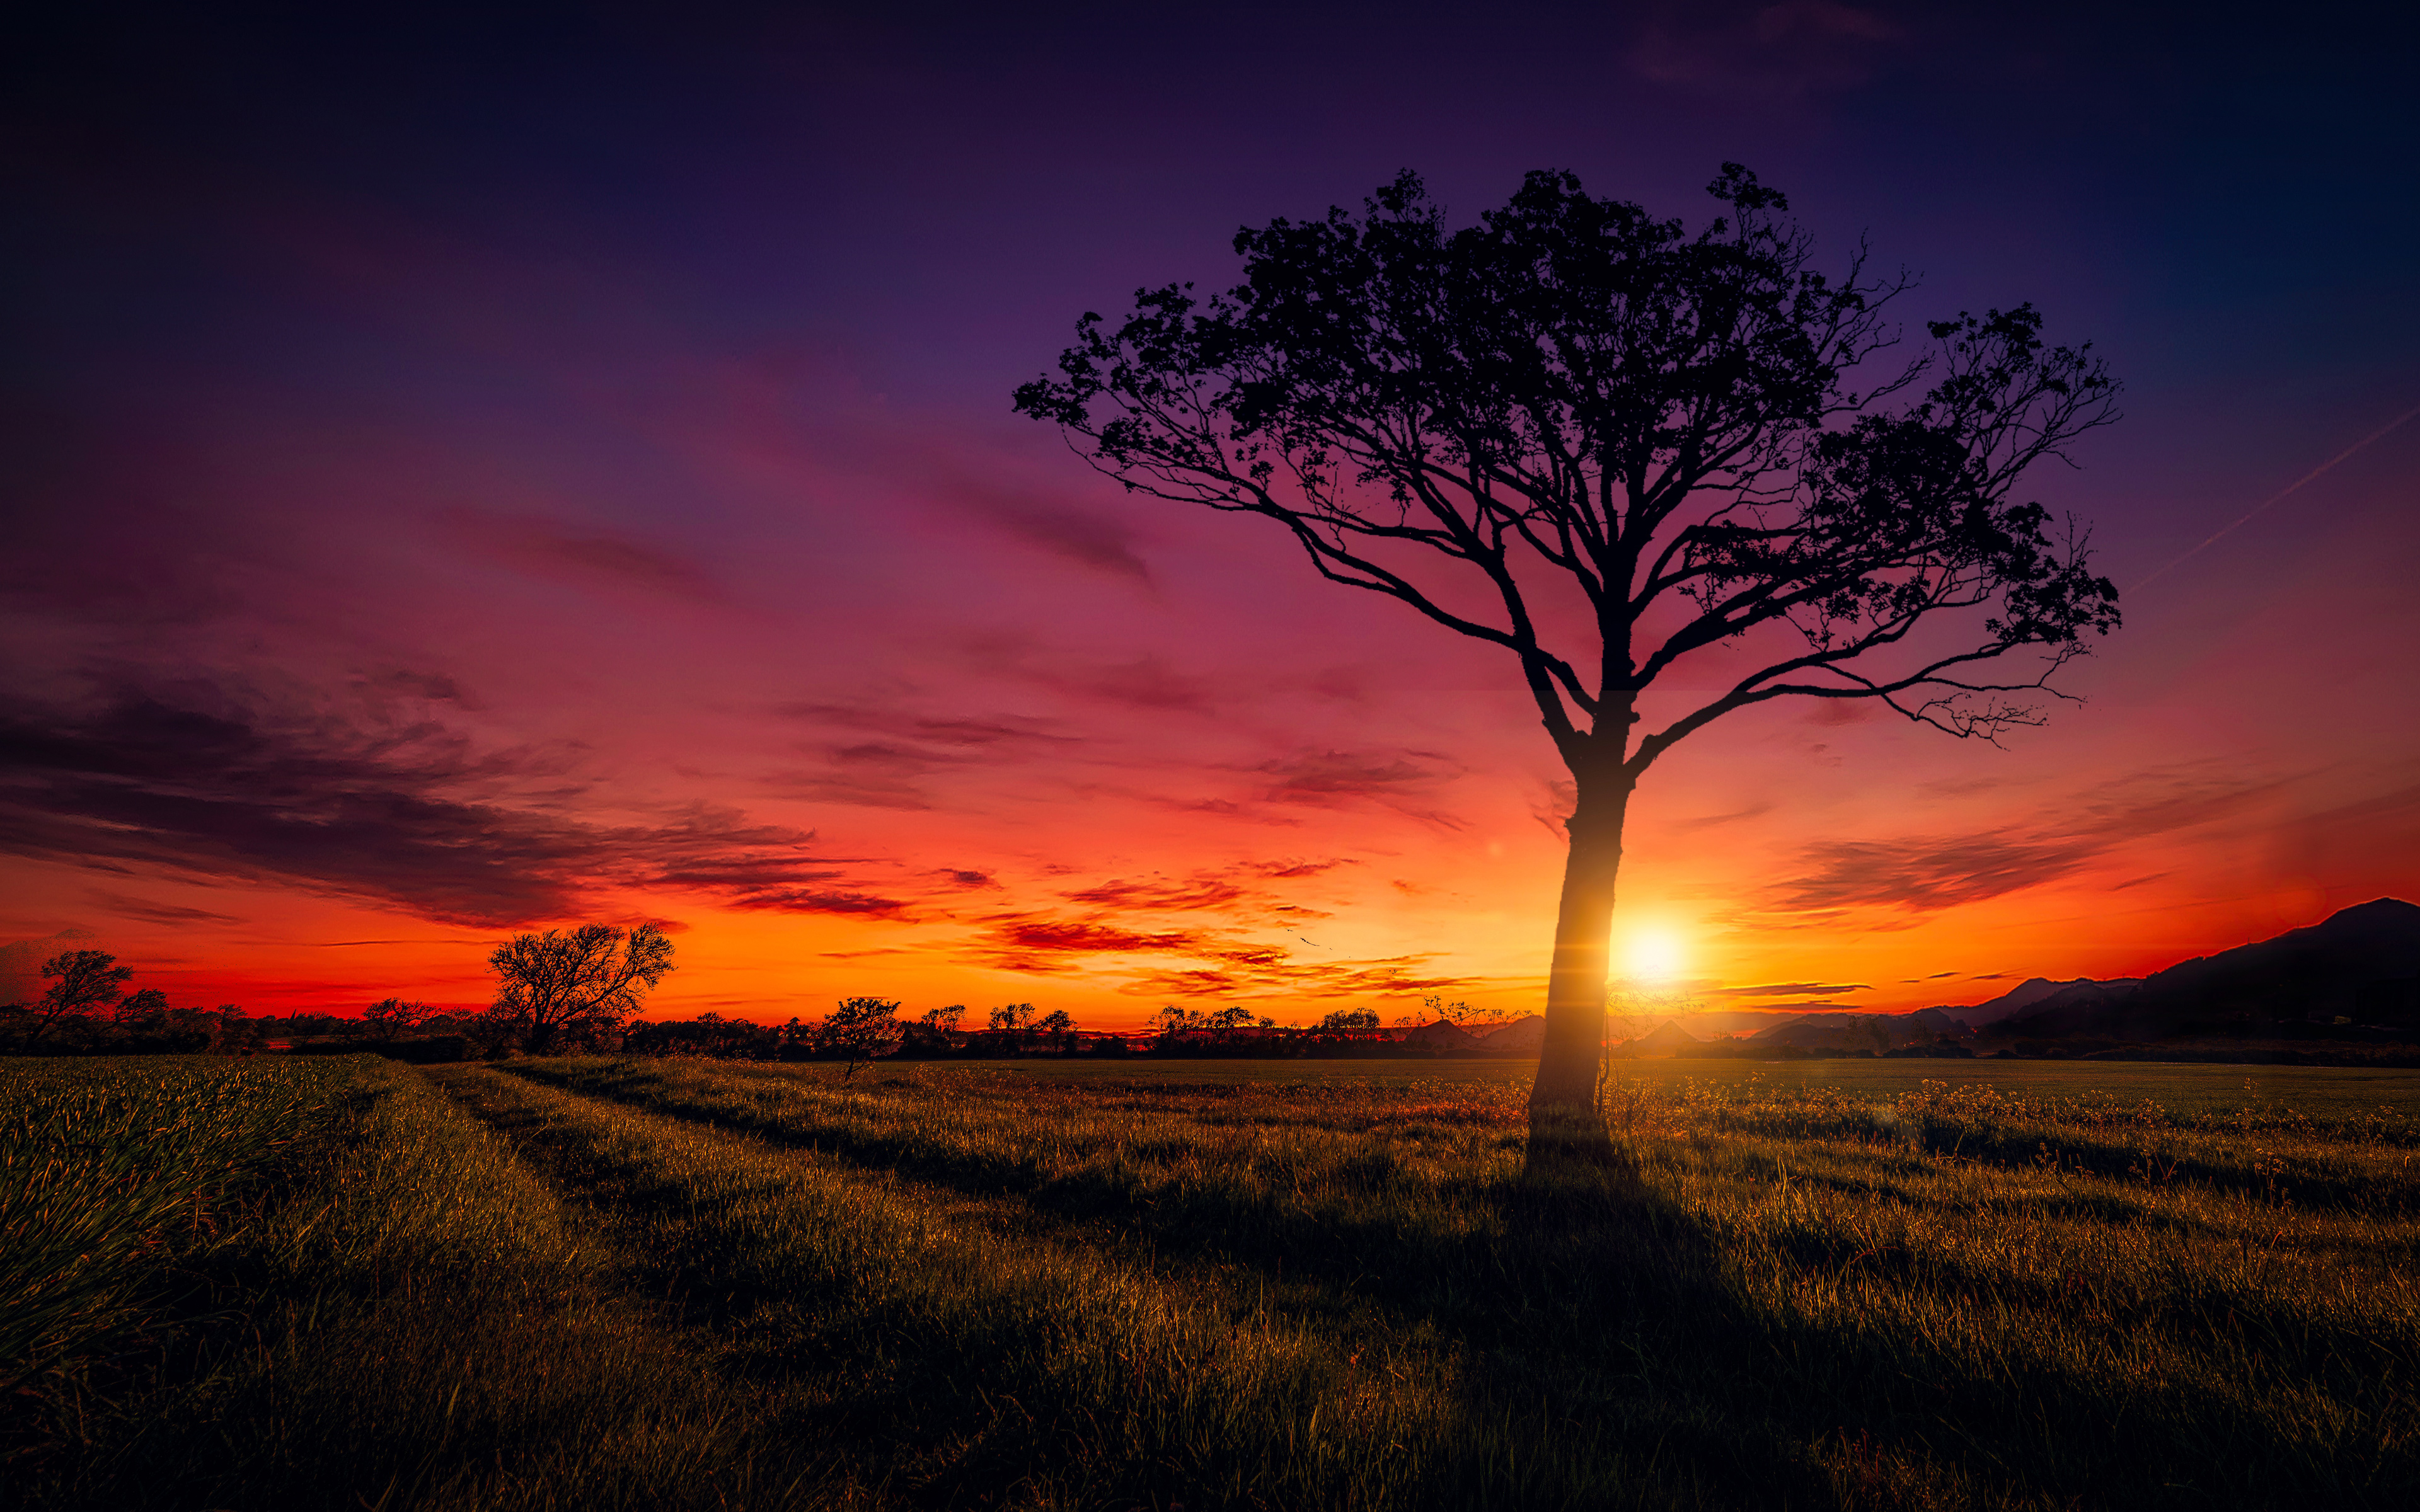 Sunset Scenery Wallpapers | HD Wallpapers | ID #20047